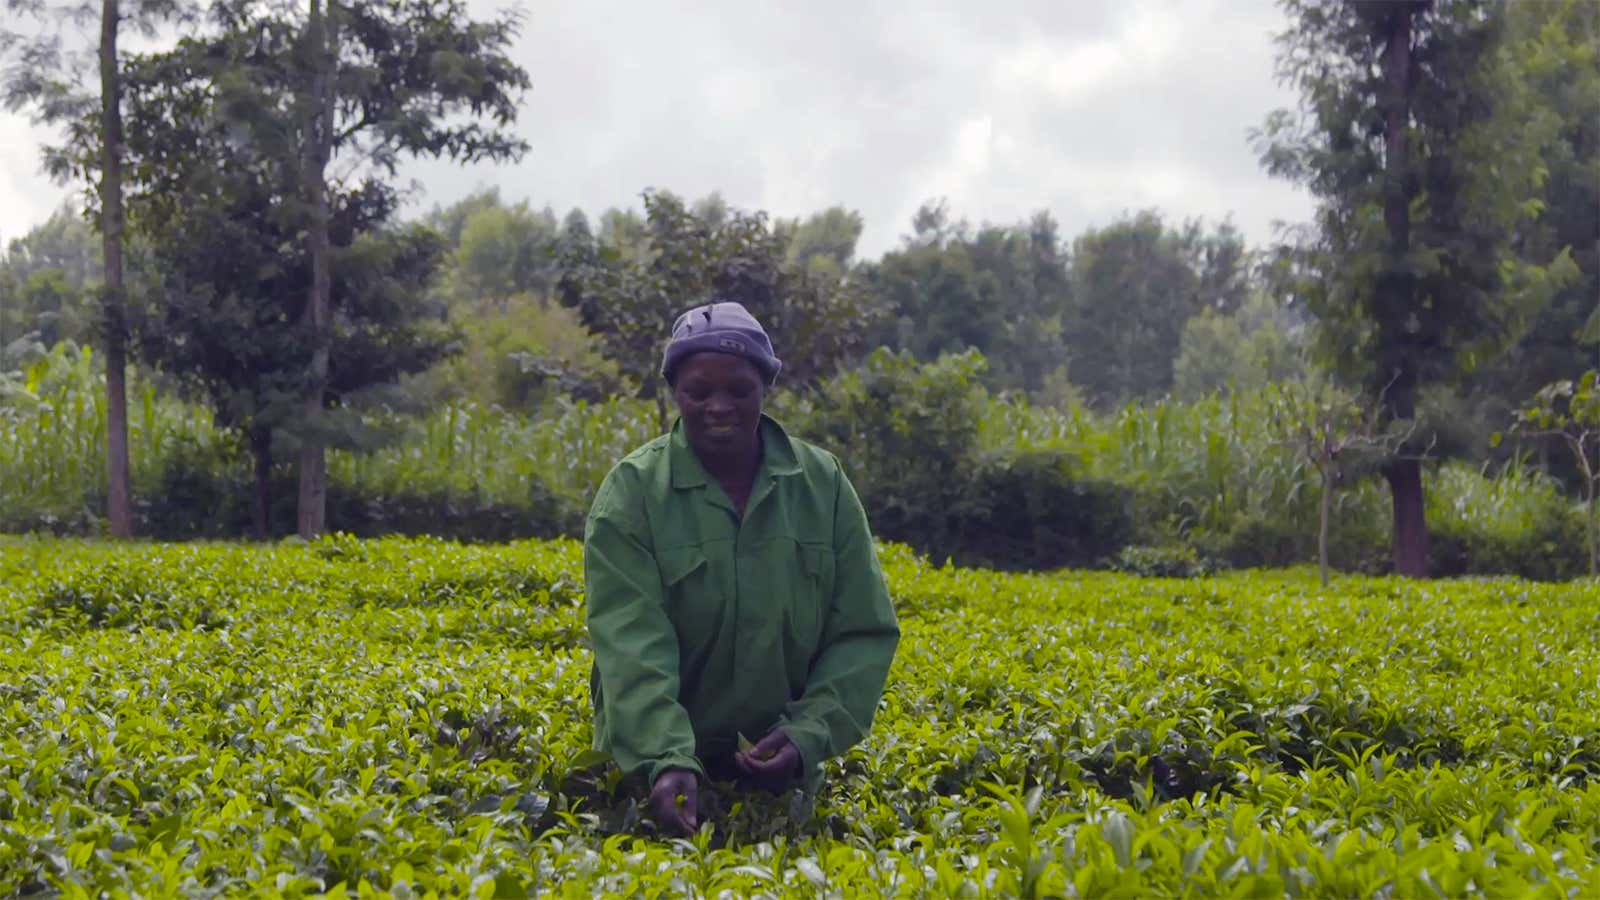 Tech startups in Kenya are helping to make sure that farmers are paid fairly and quickly for their products.